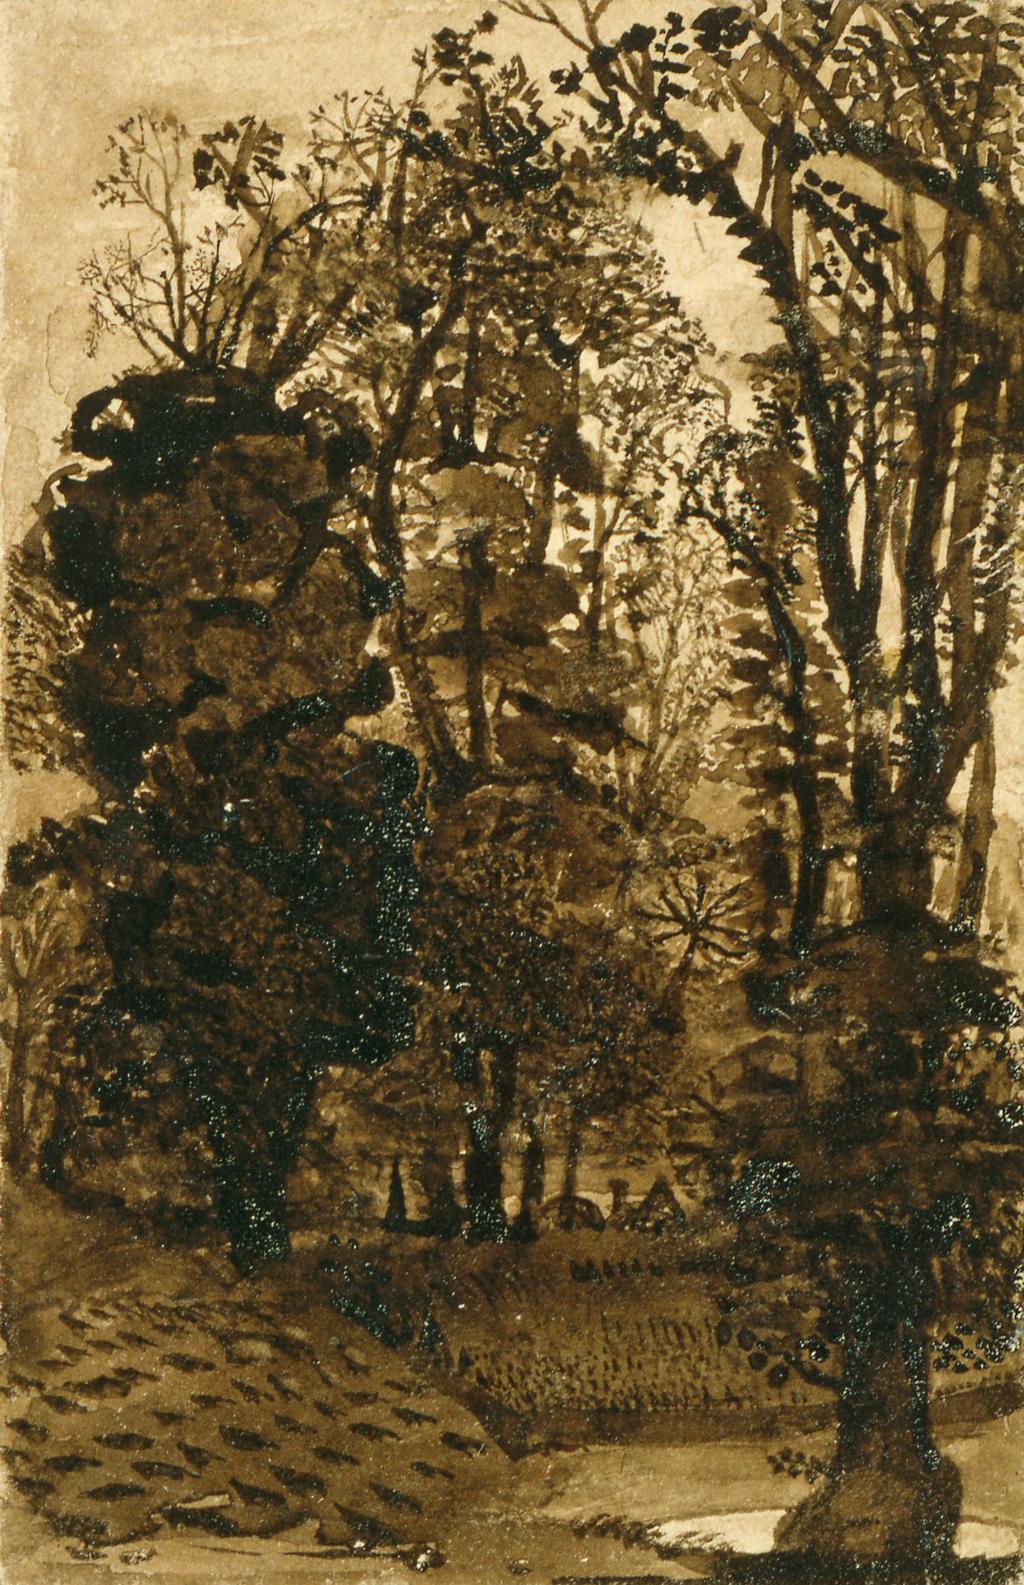 An image of Title/s: Dark Trees by a Pool Maker/s: Palmer, Samuel (draughtsman) [ULAN info: British artist, 1805-1881]Technique Description: pen and sepia ink, sepia wash on card, stuck down Dimensions: height: 105 mm, width: 67 mm Date: circa 1826 to 1827   